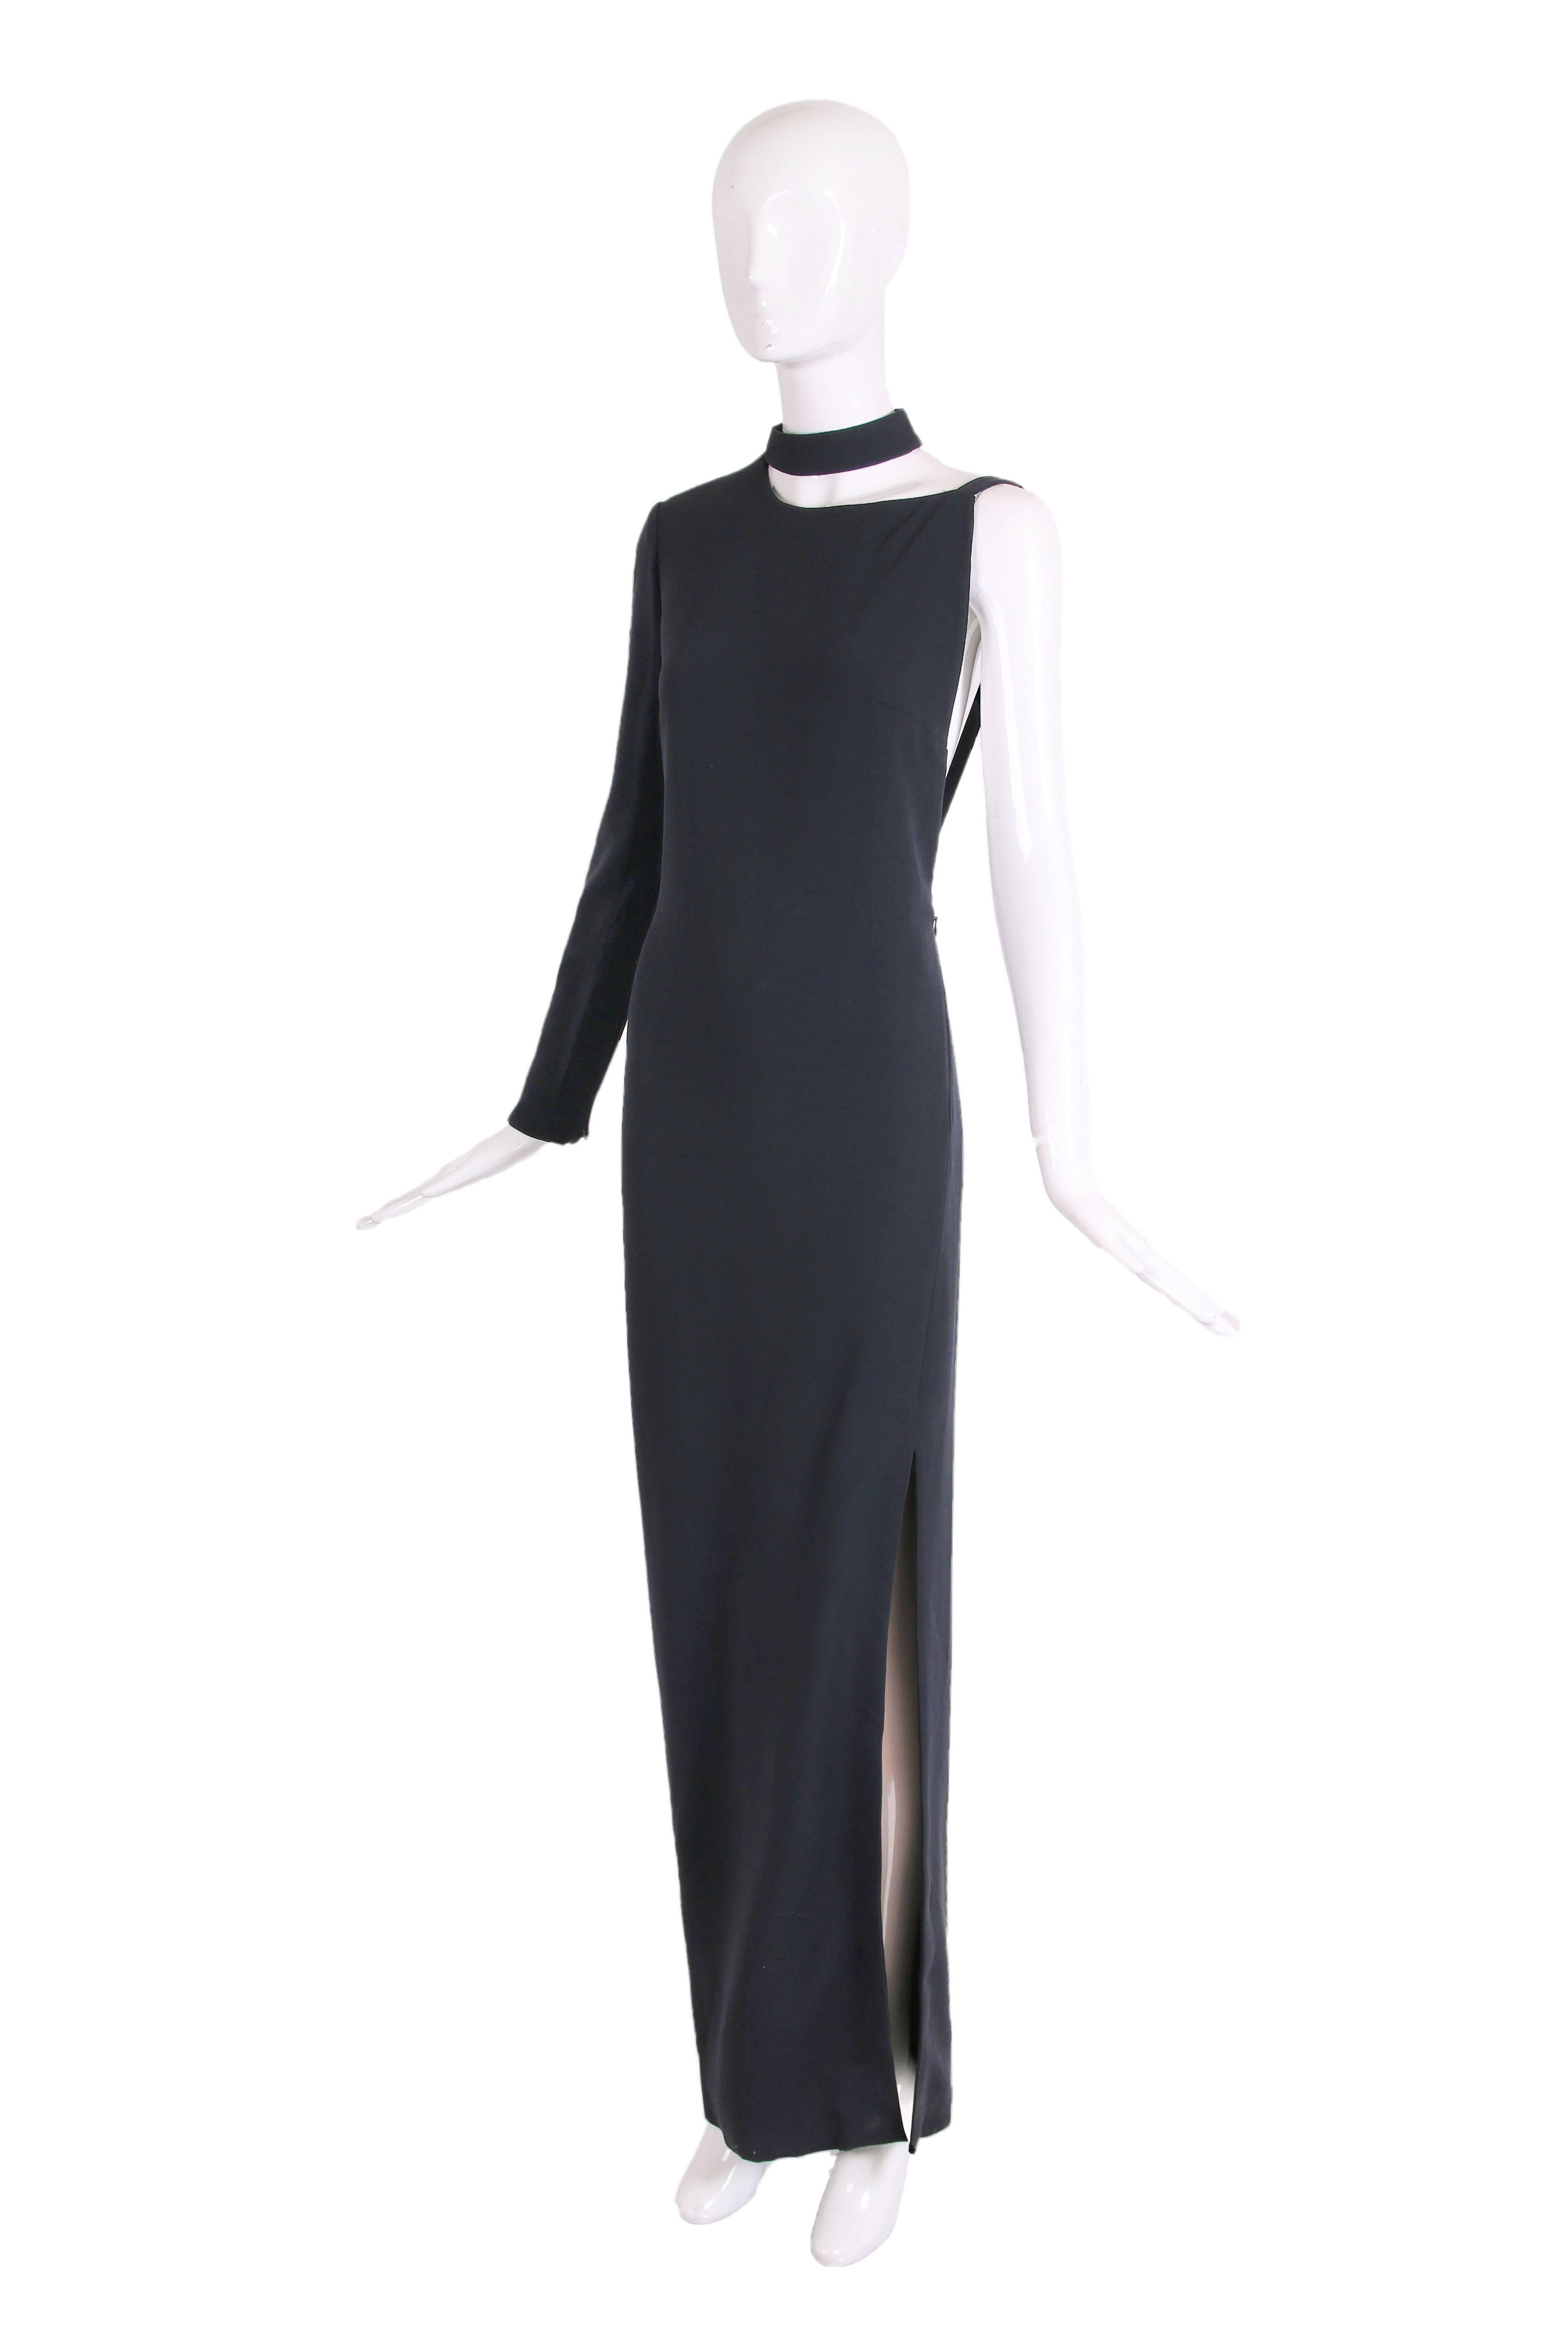 Tom Ford black rayon blend single sleeve evening gown with neck ring, thigh-high slit and partial open back. See third photo of Karlie Kloss in exact same dress. In excellent condition - size tag 40.